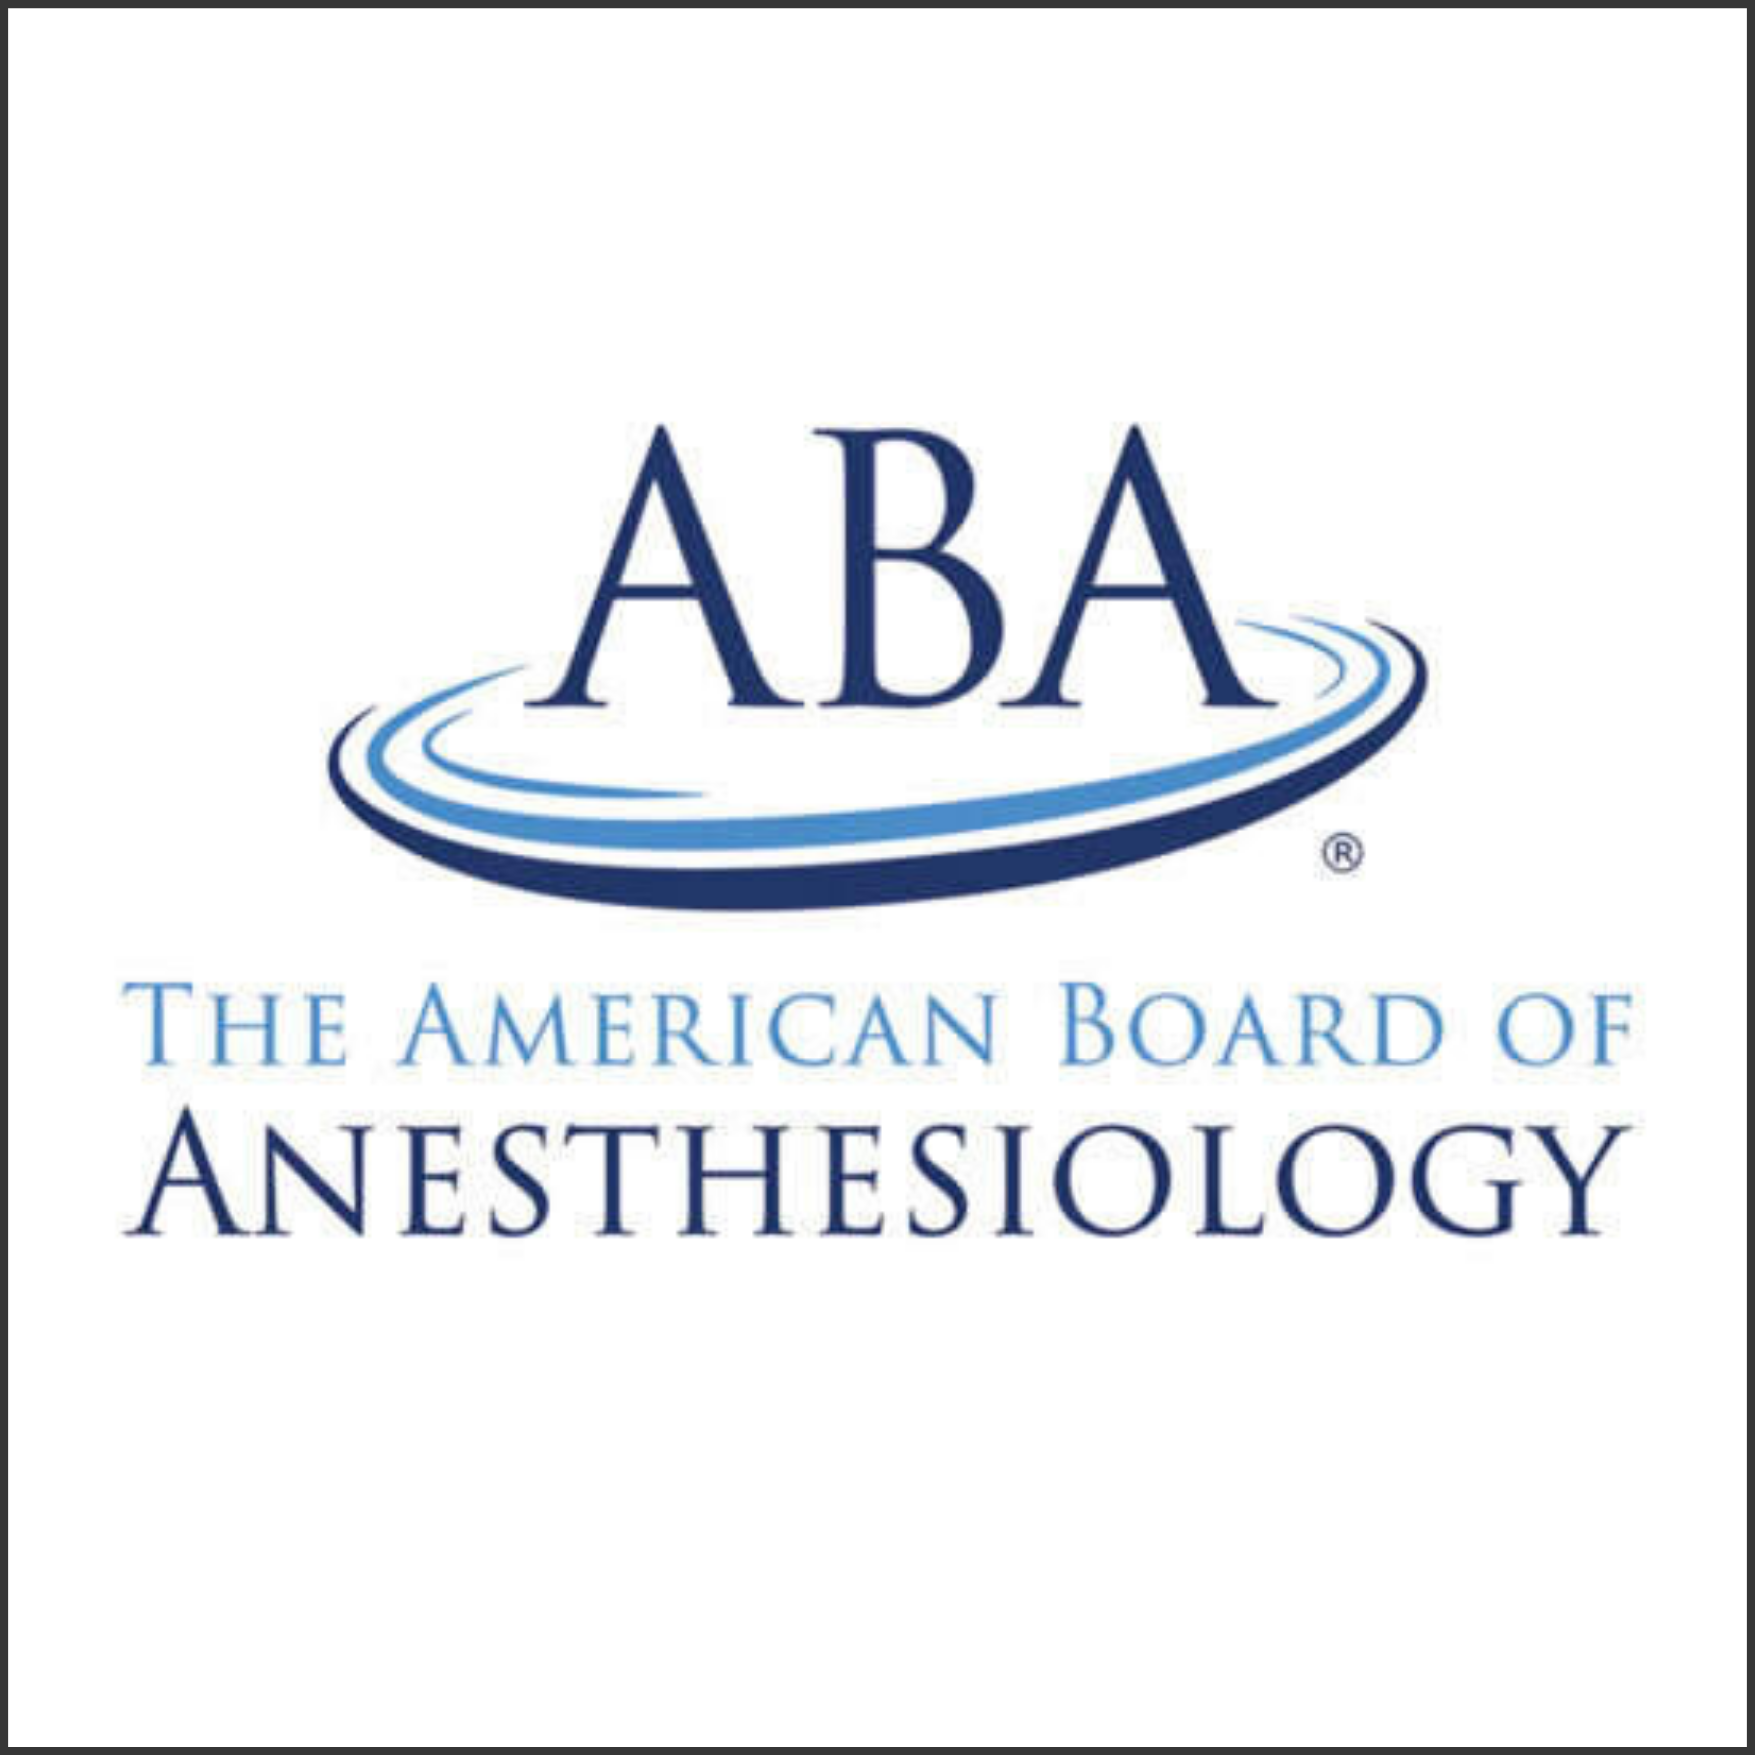 American Board of Anesthesiology logo